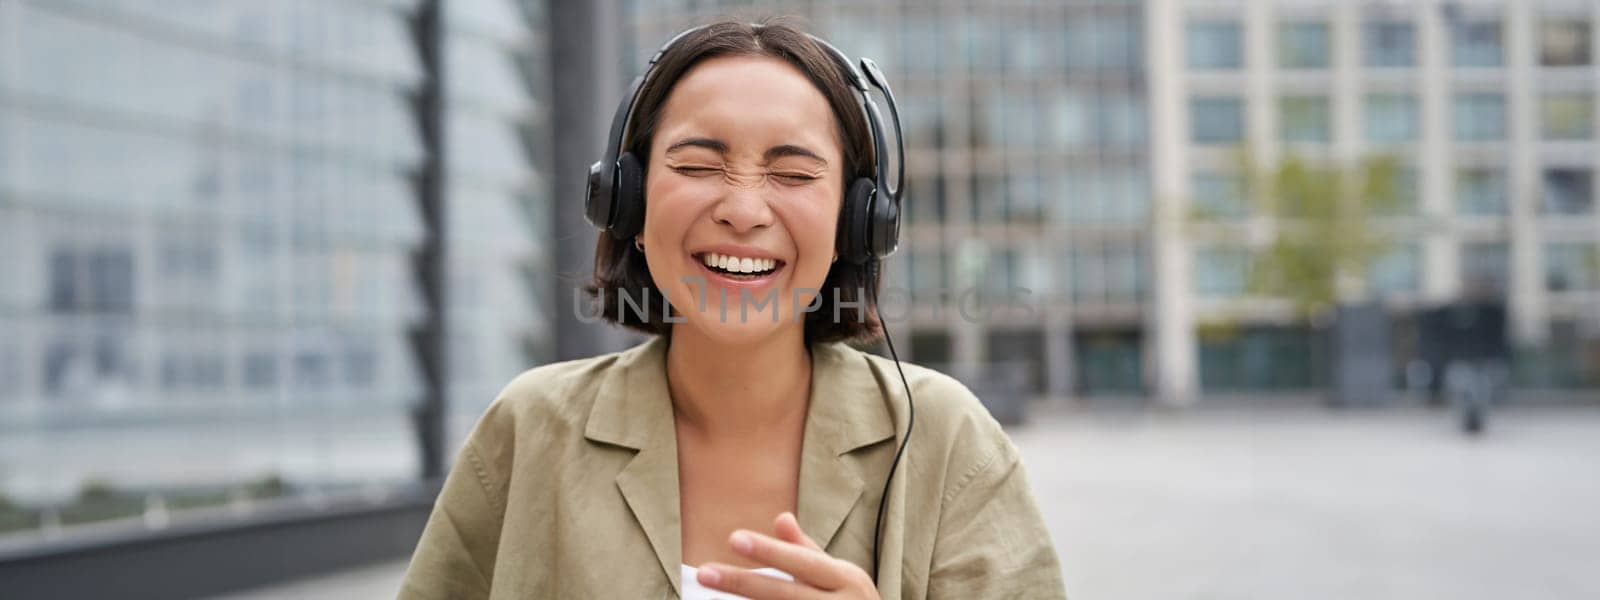 Carefree asian girl, laughing and smiling, wearing headphones and walking on street. Outdoor shot of young woman listening music and looking happy.